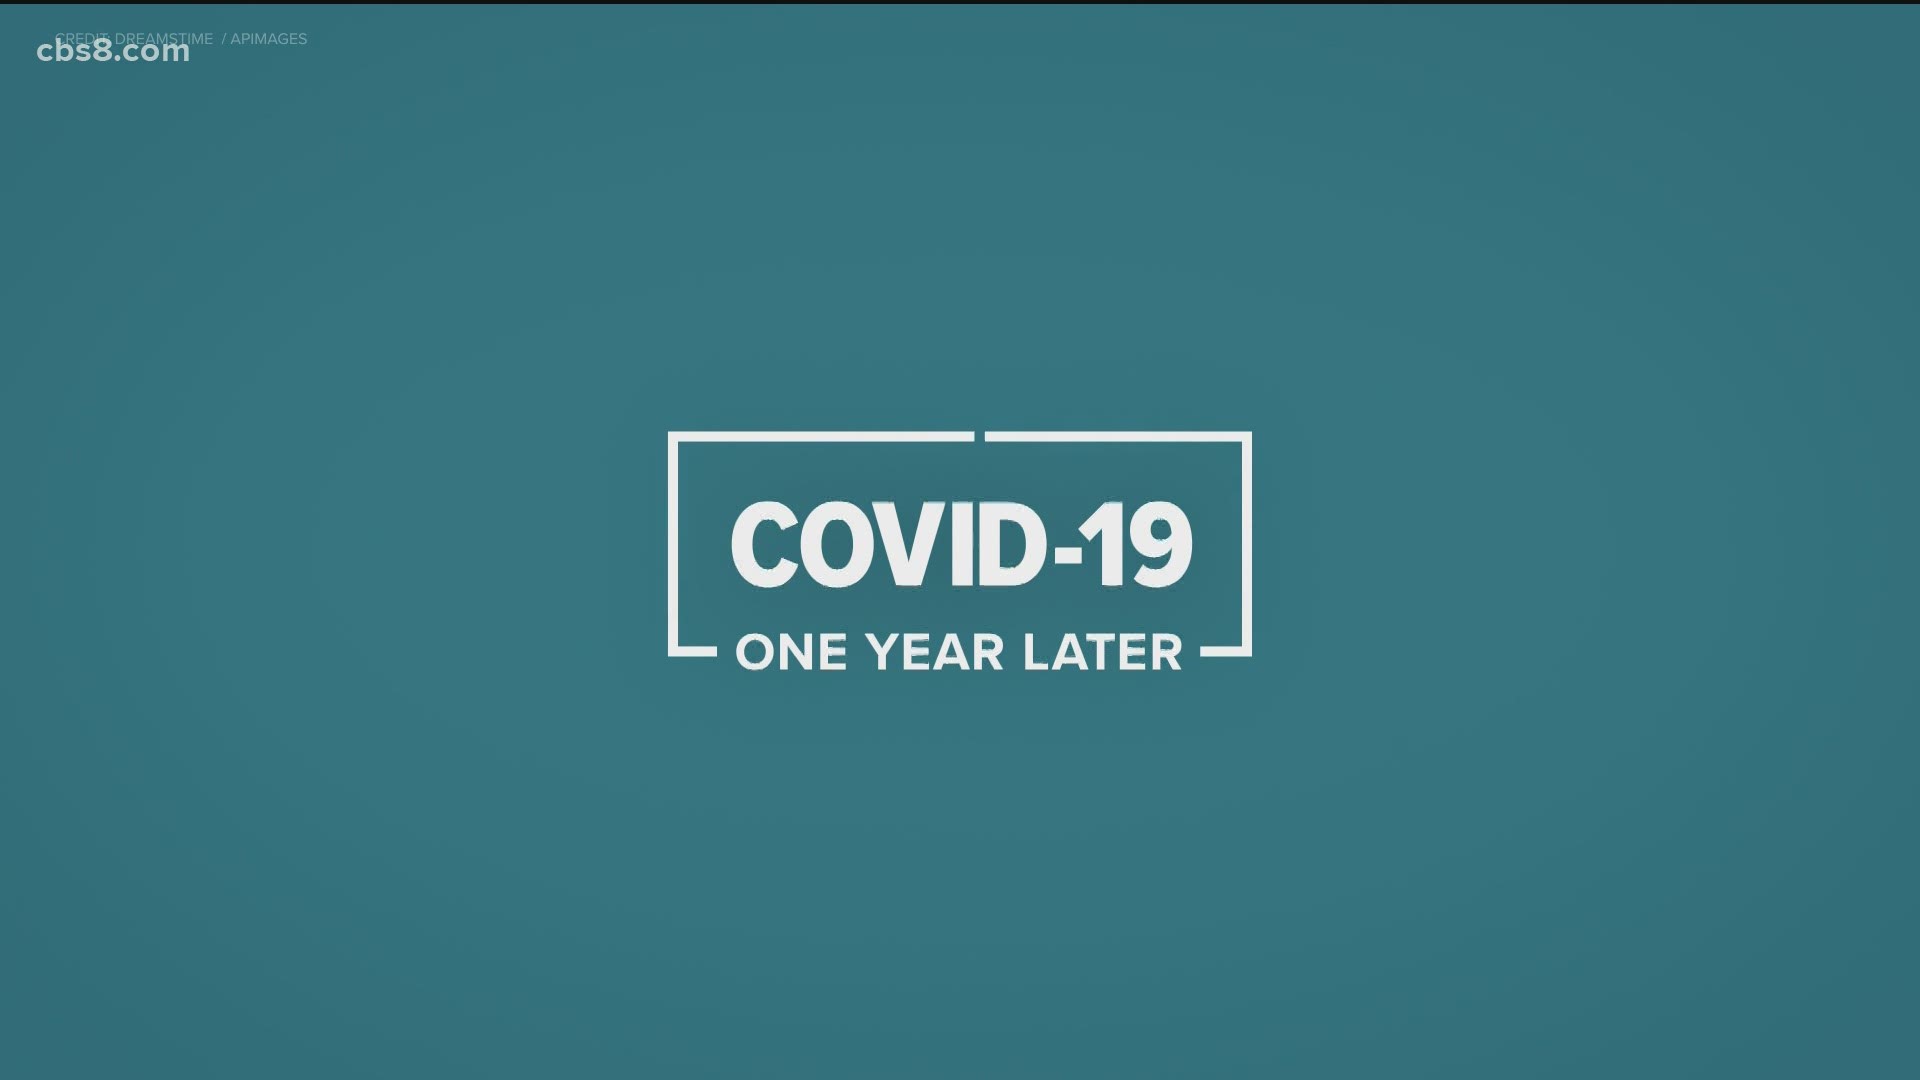 So much has happened in the 365 days since the first COVID-19 case was reported in San Diego County.